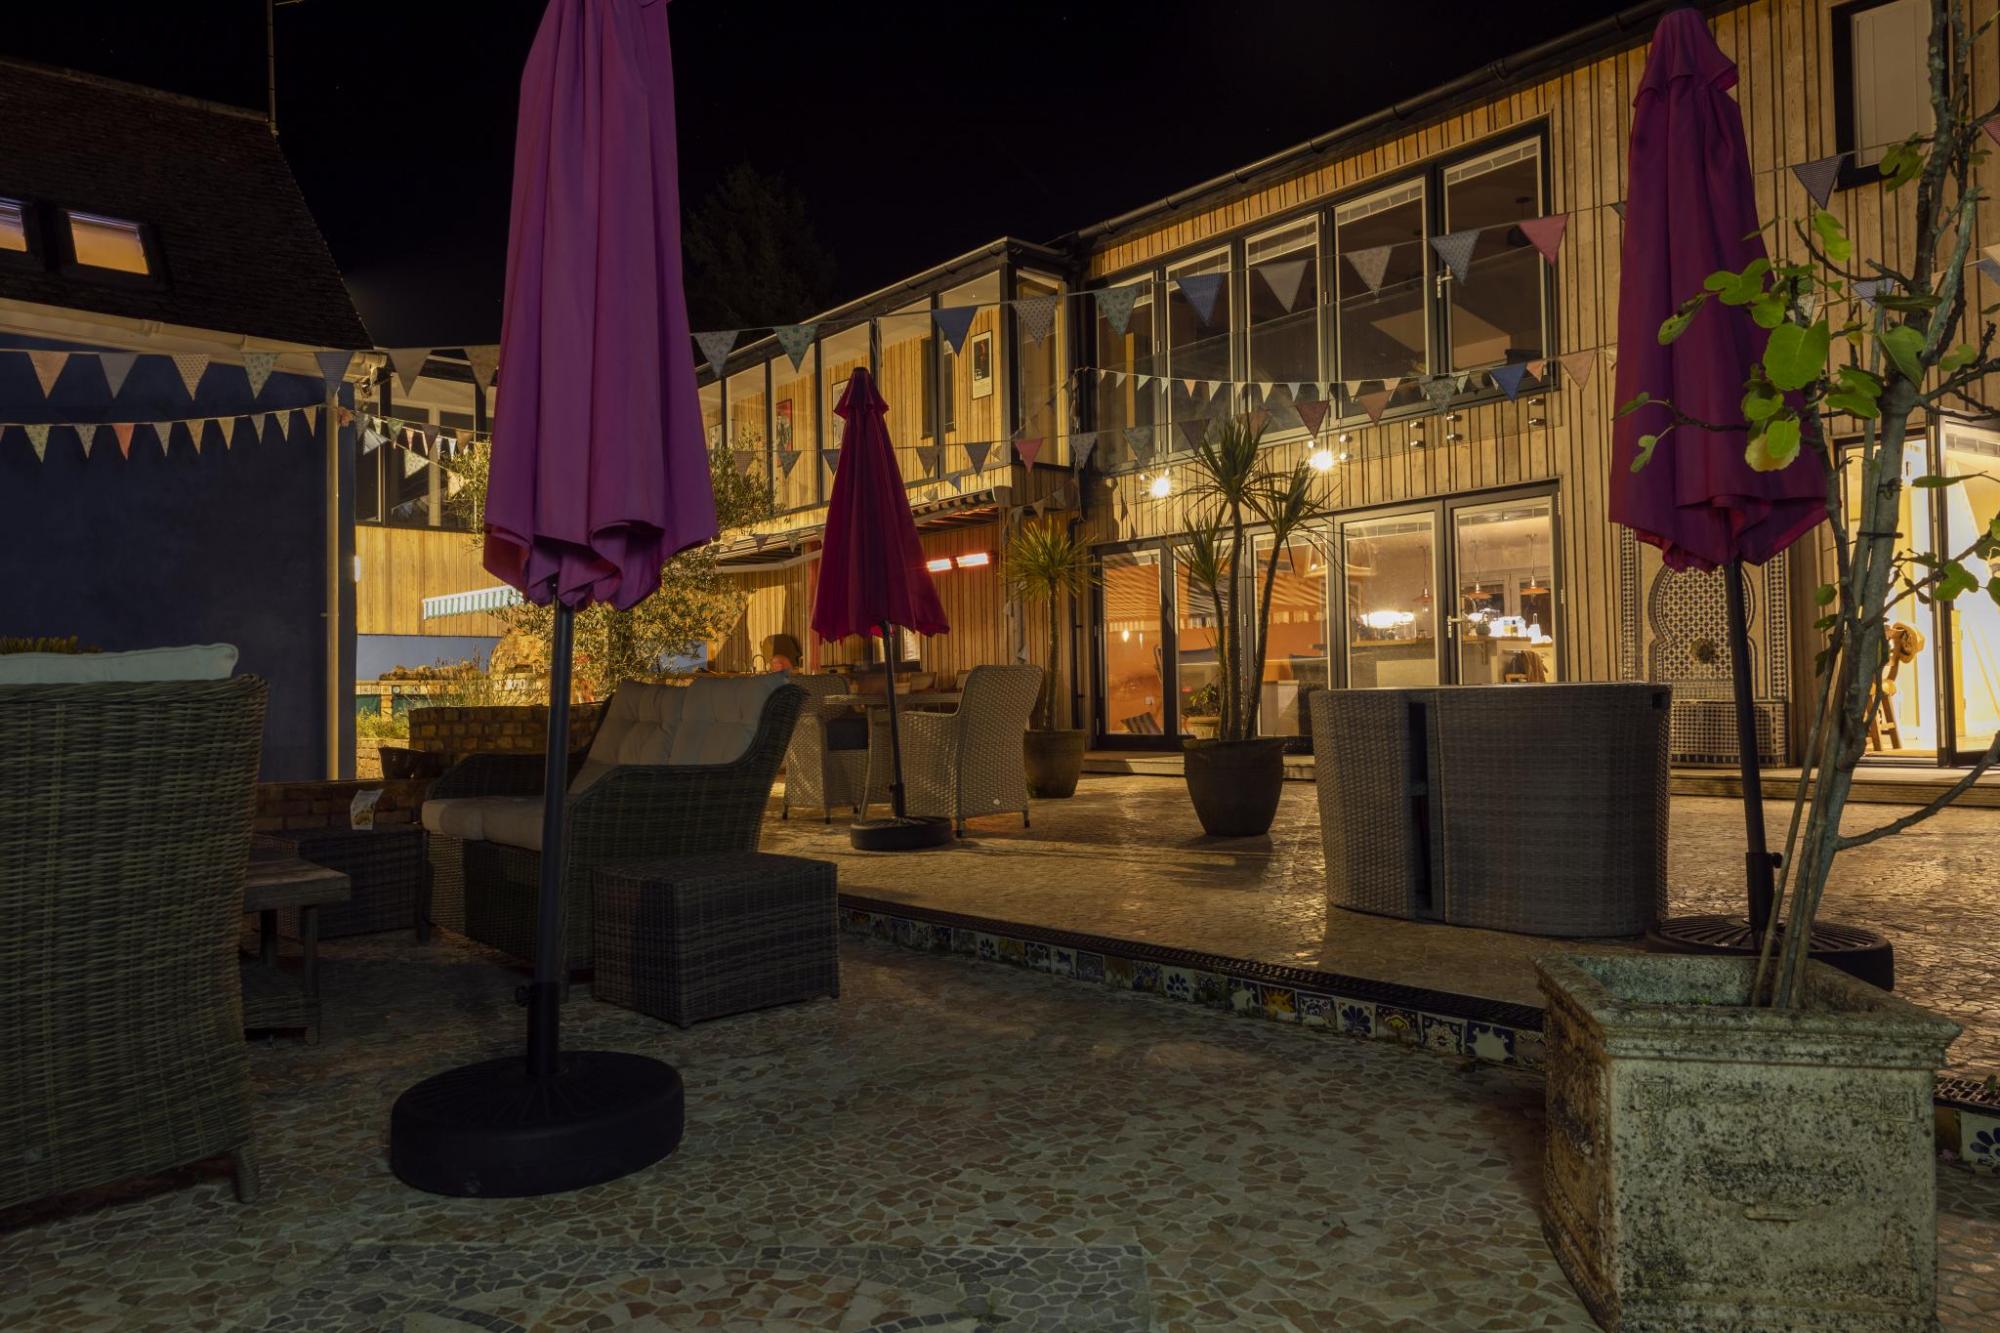 A wooden socialising deck outside a modern-looking bed and breakfast at night